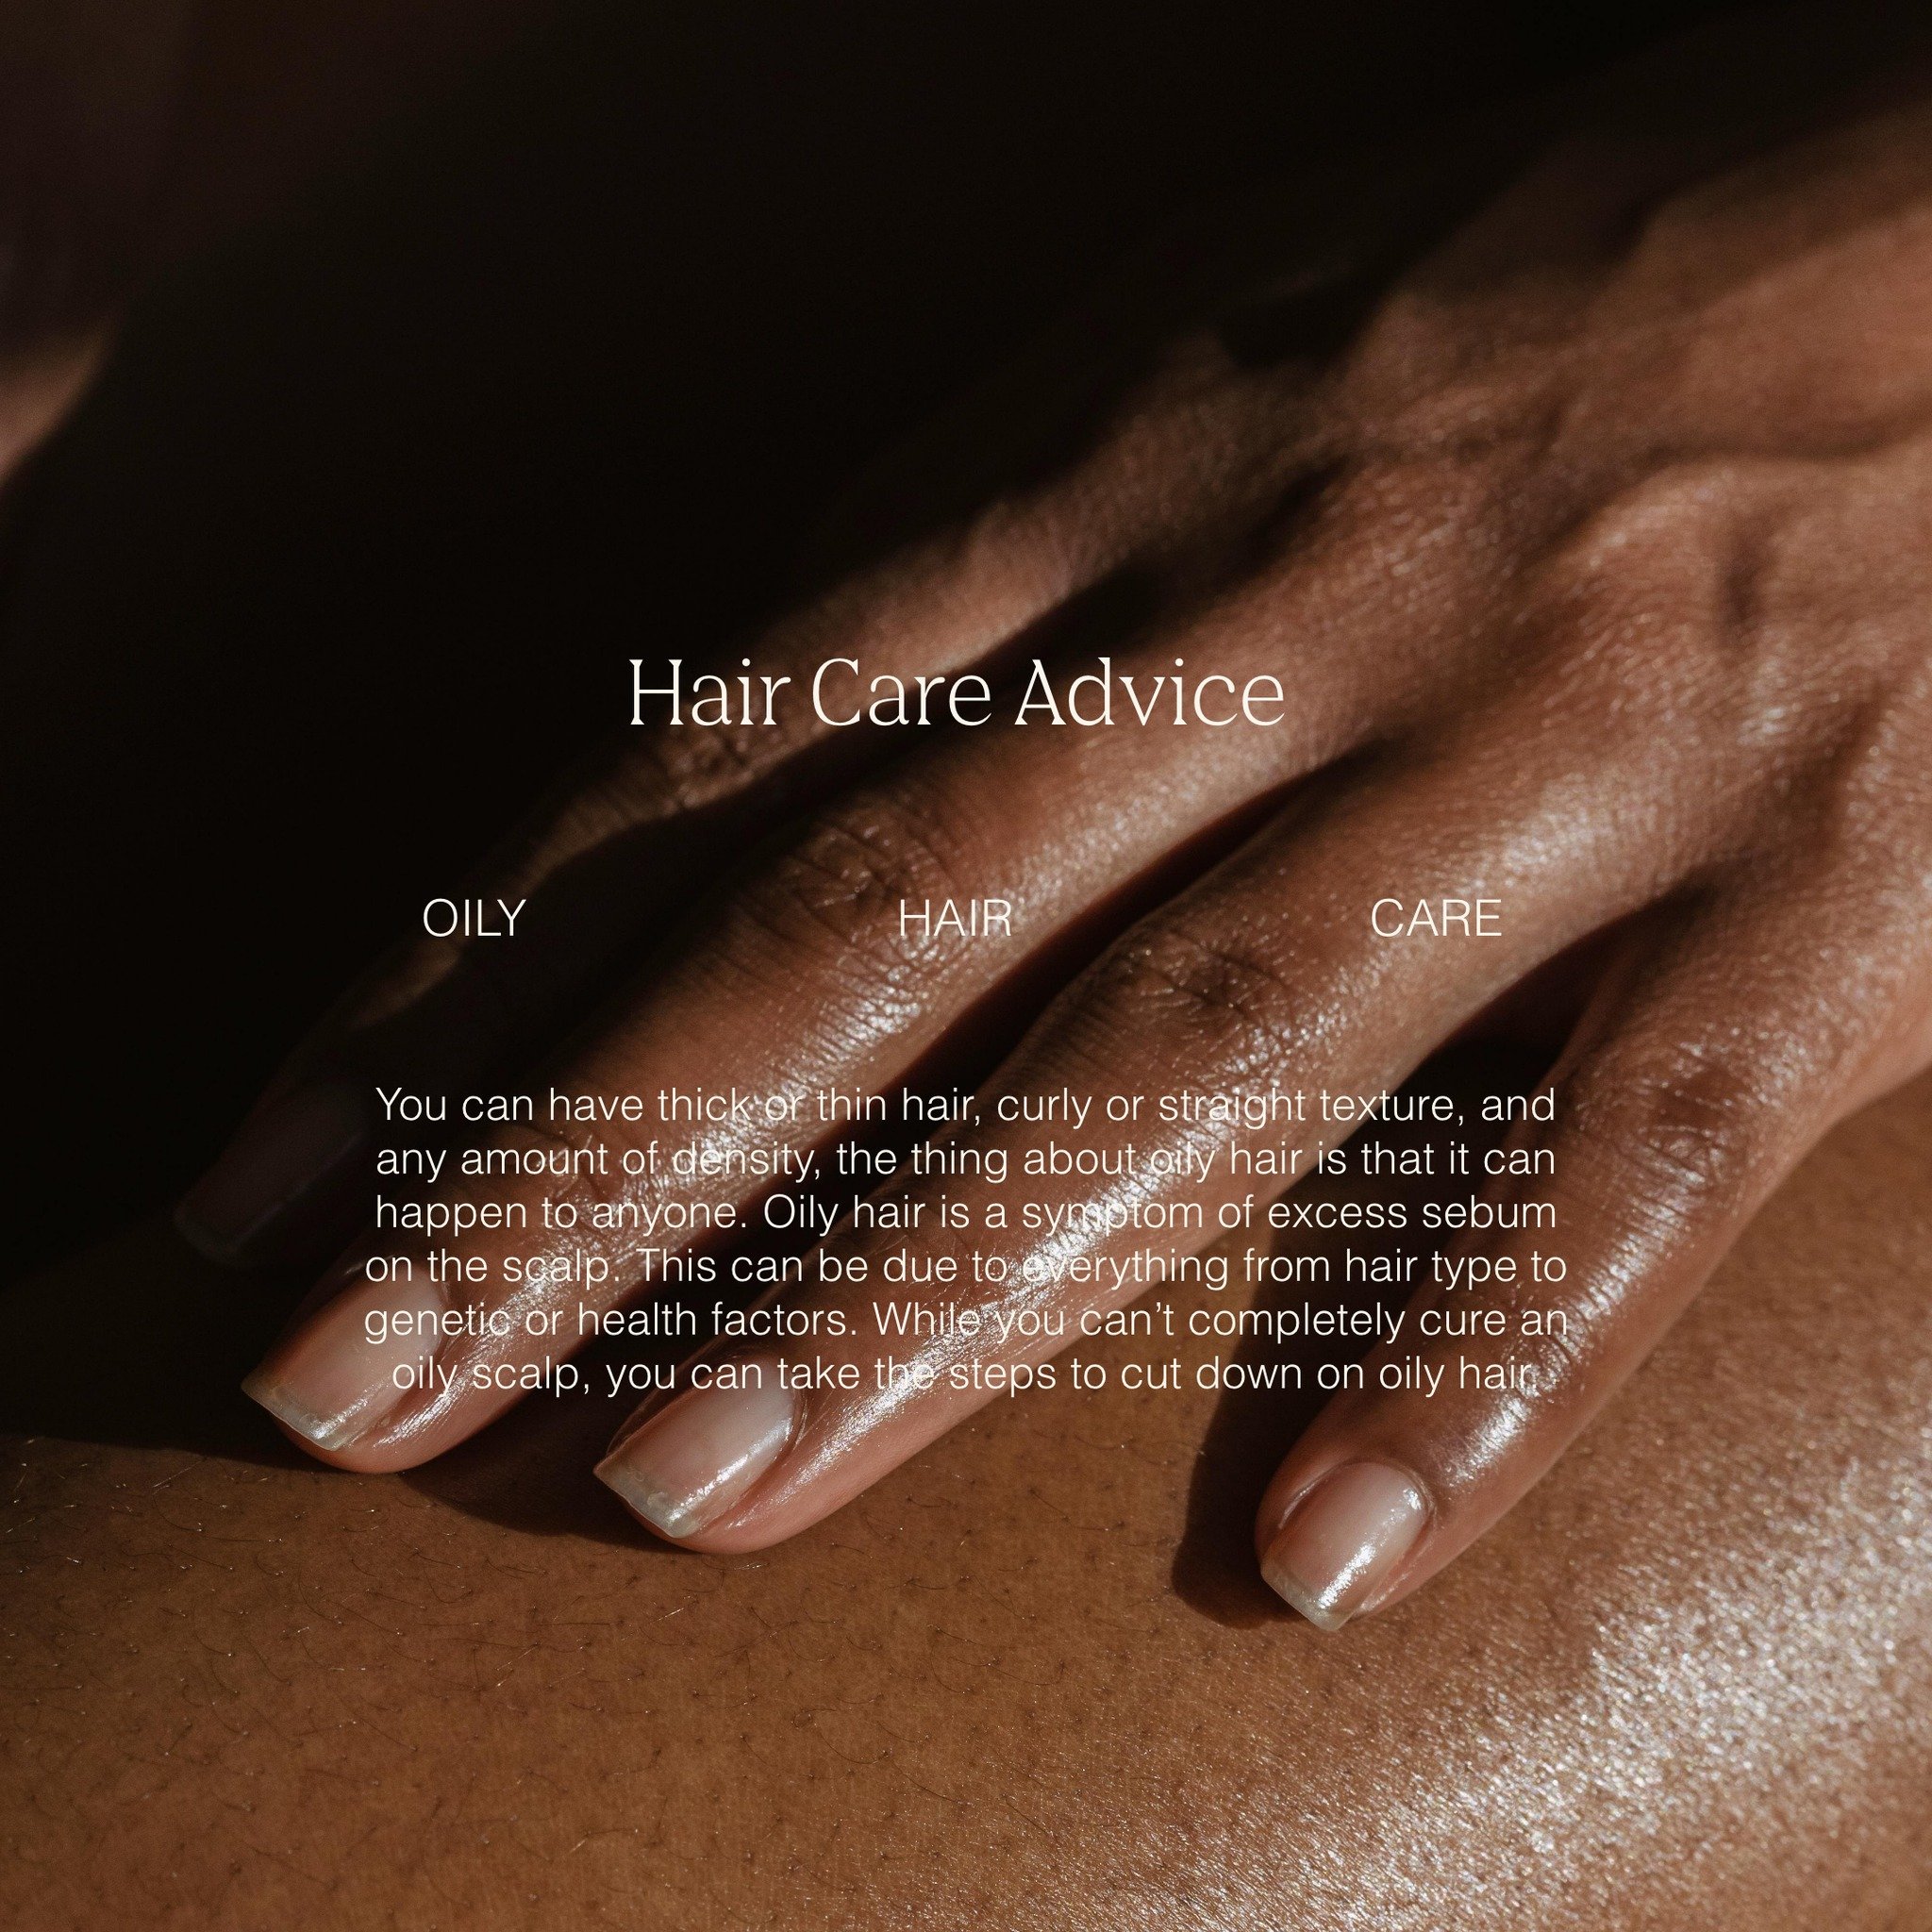 Oily hair &mdash; 

A problem we see many clients suffer. Whether you have thick, thin, curly or straight hair, this problem can affect anyone. The issue: excess sebum production on the scalp - designed to keep your scalp and strands hydrated - too m